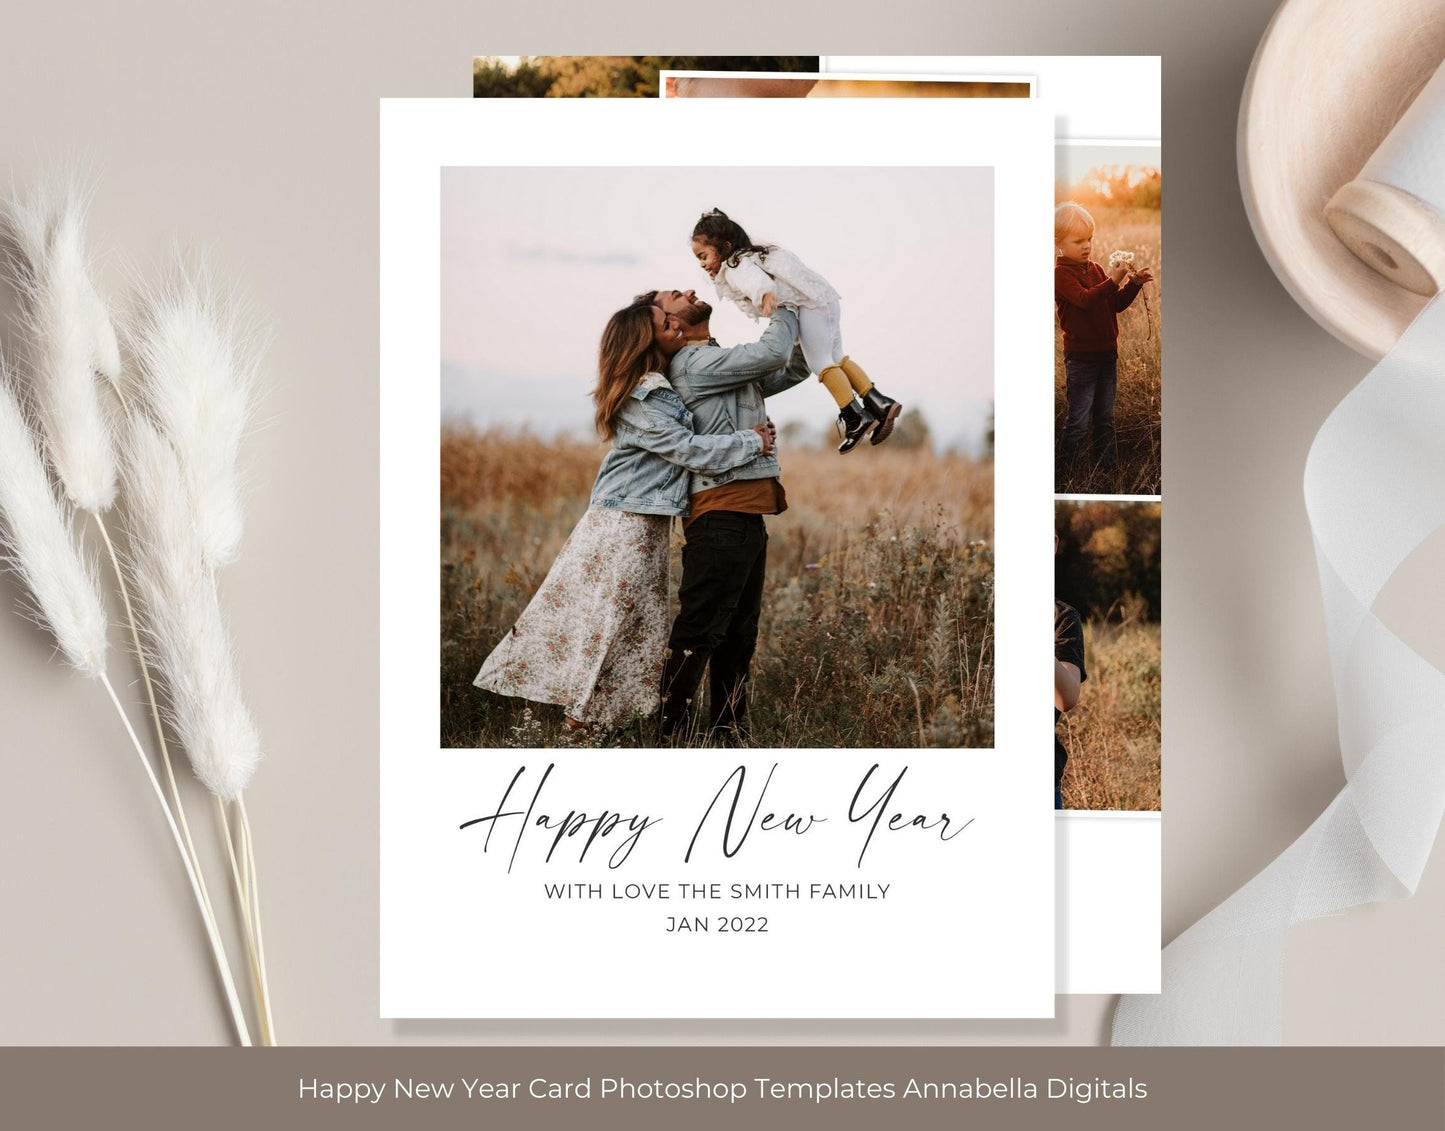 Happy New Year Card Photoshop Template